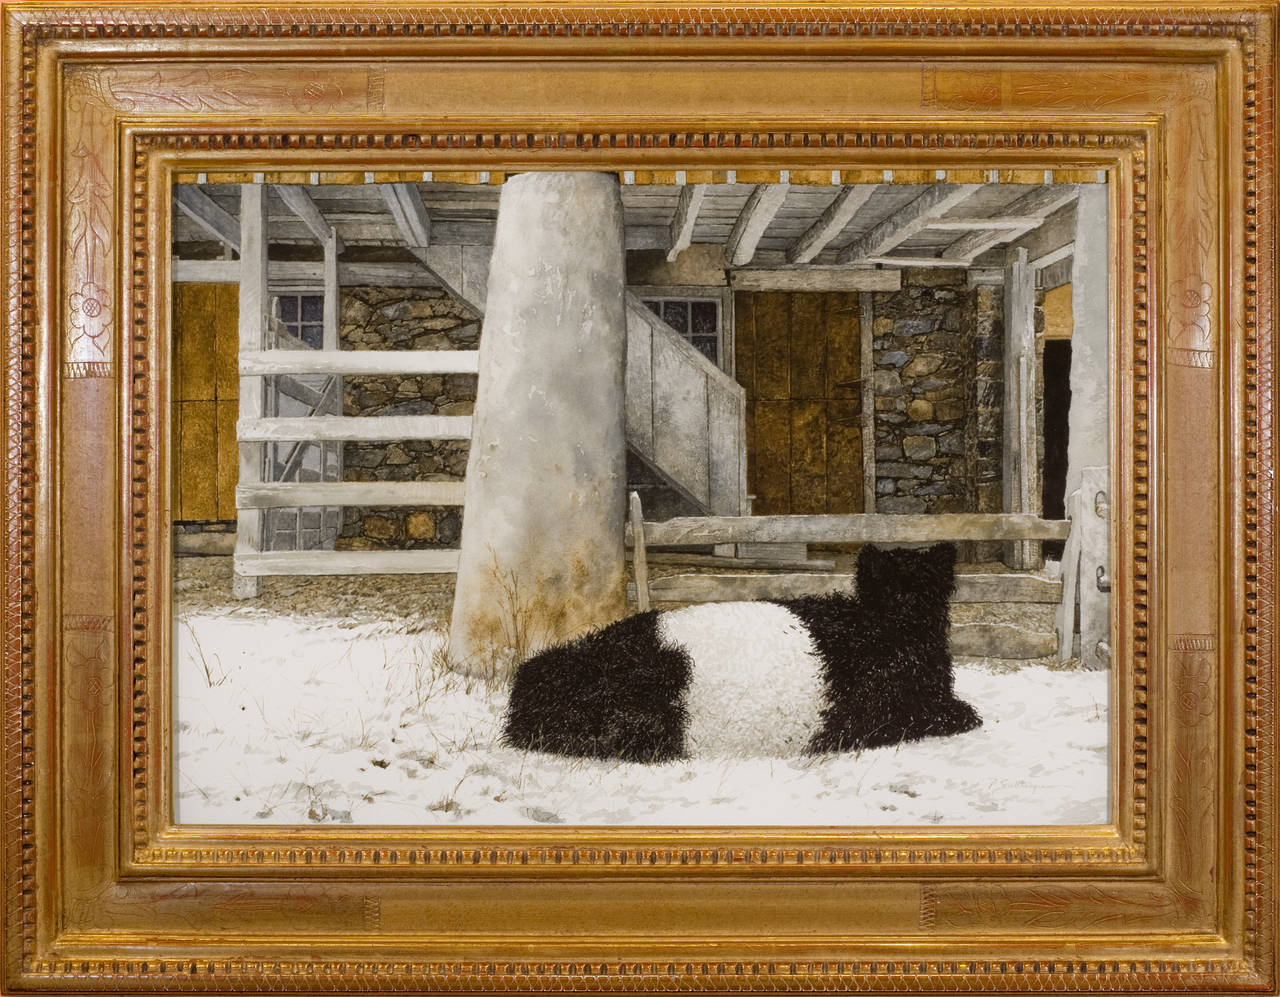 Peter Sculthorpe Animal Art - "Belted Galloway Calf"